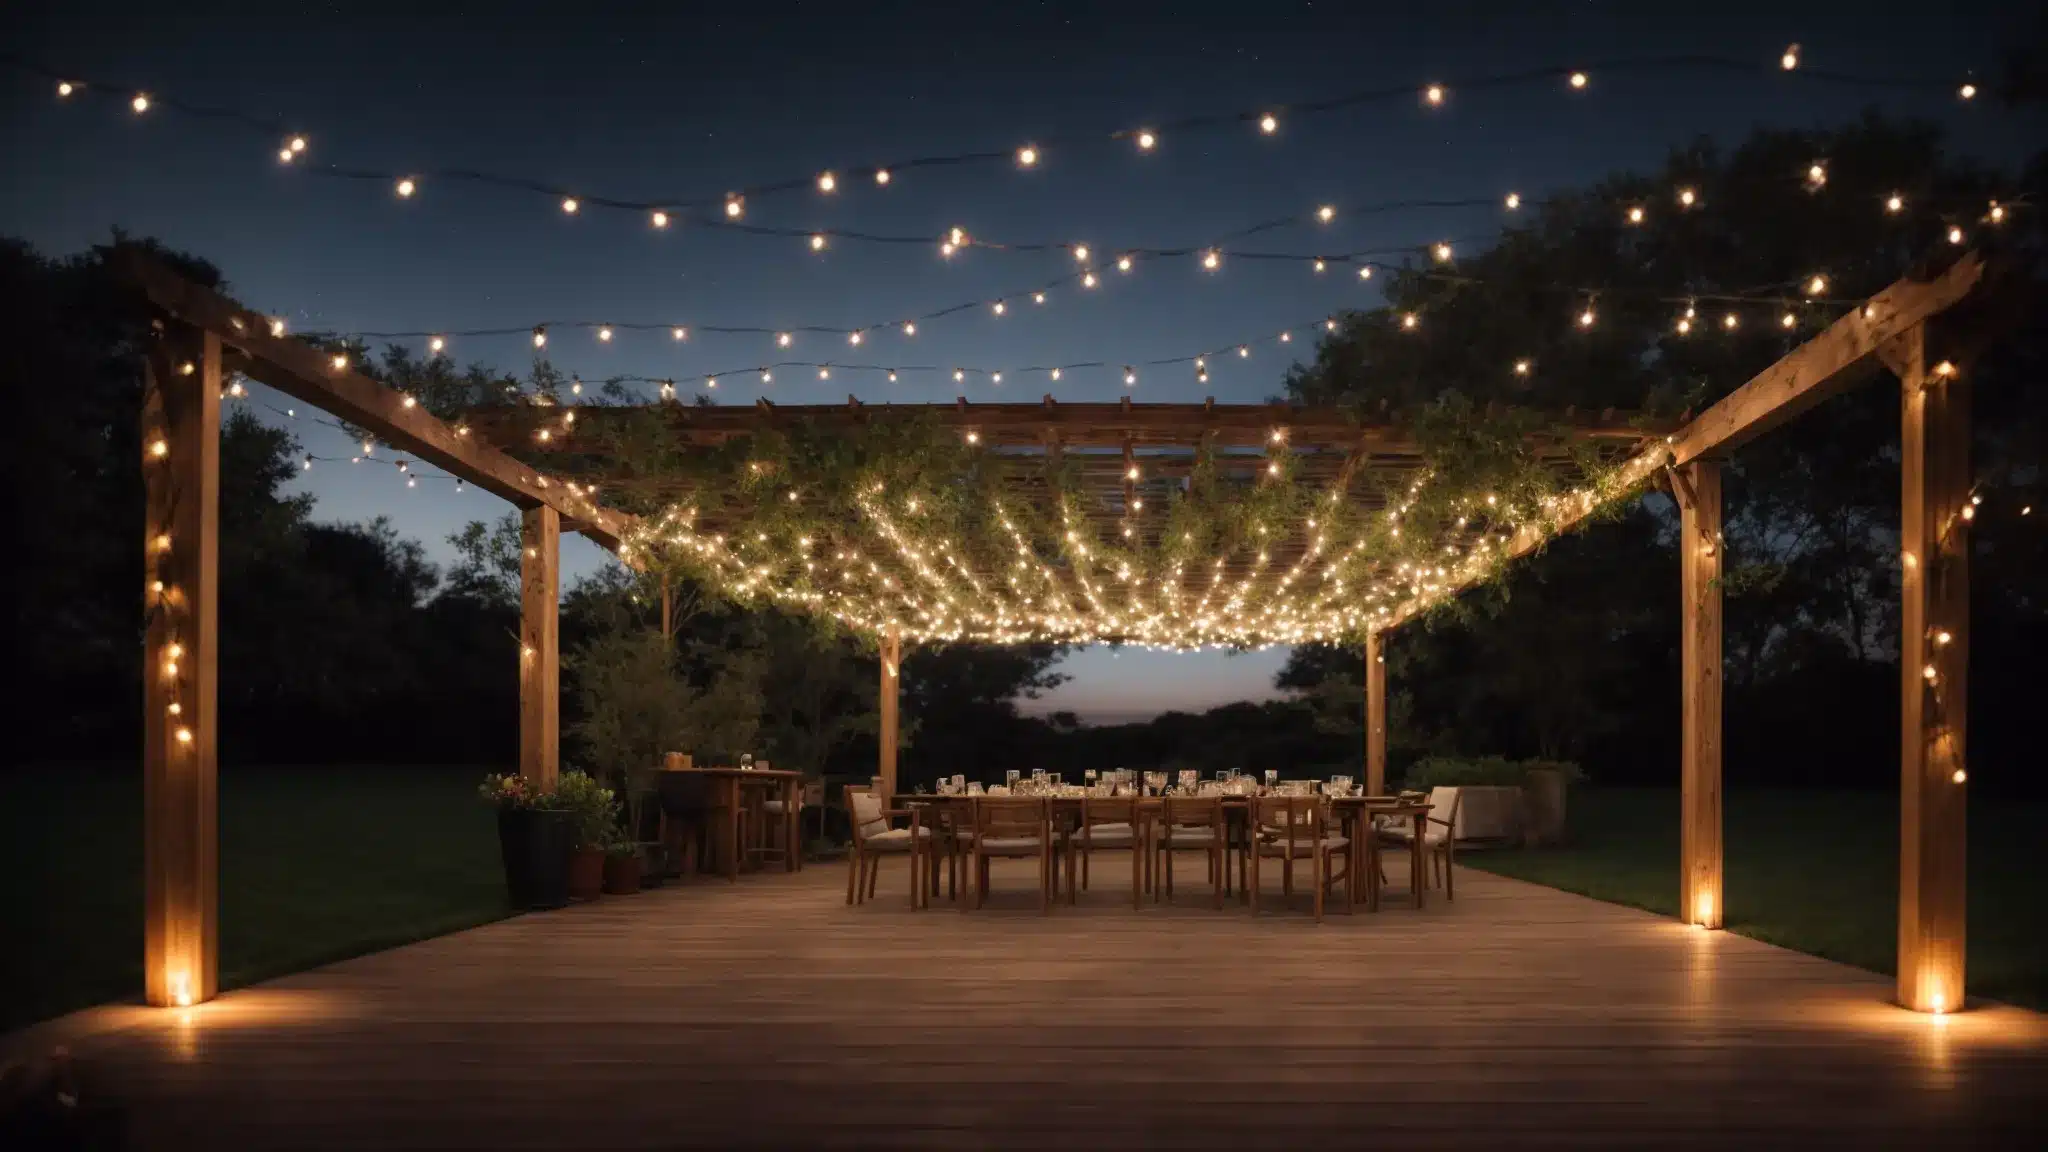 a pergola warmly lit by strands of fairy lights, casting a soft glow over an intimate outdoor dining setup beneath a starry sky.